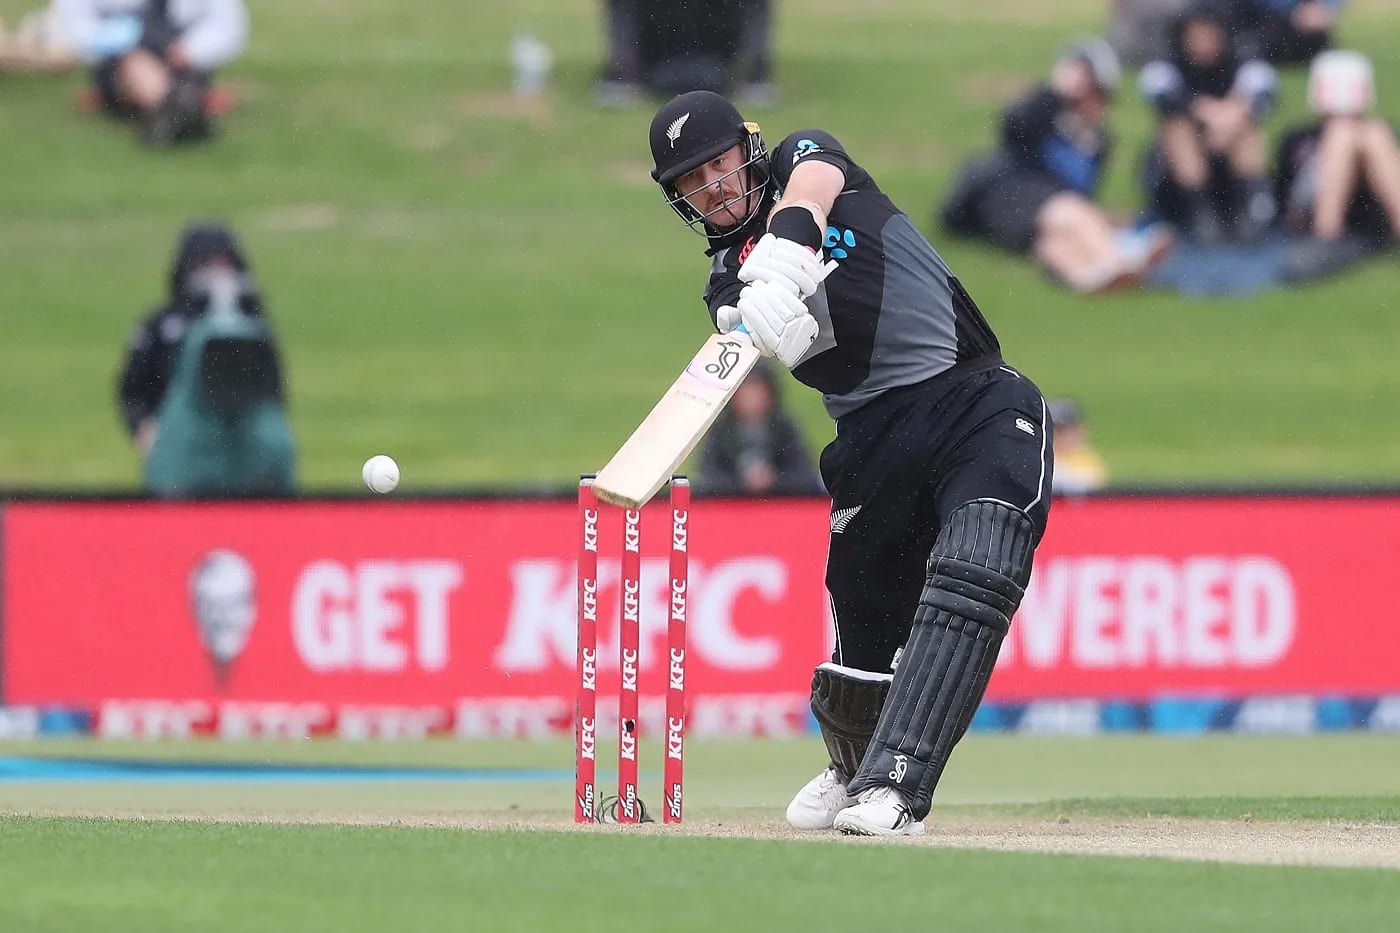 Martin Guptill set to make record seventh appearance in T20 World Cups